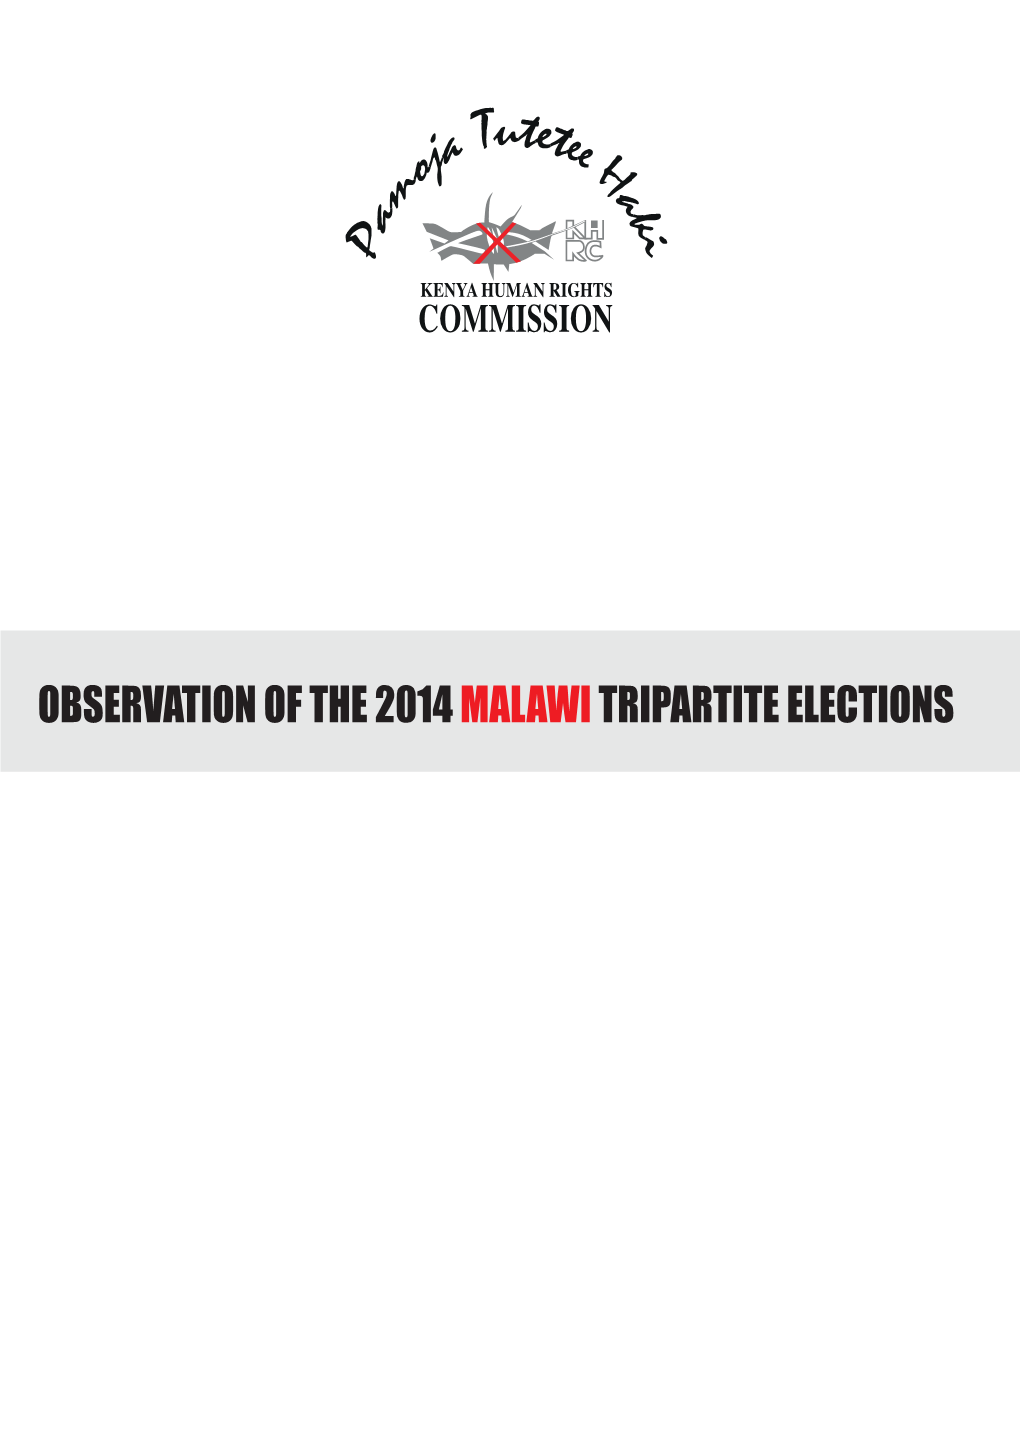 OBSERVATION of the 2014 MALAWI TRIPARTITE ELECTIONS Table of Contents 1.0 Introduction